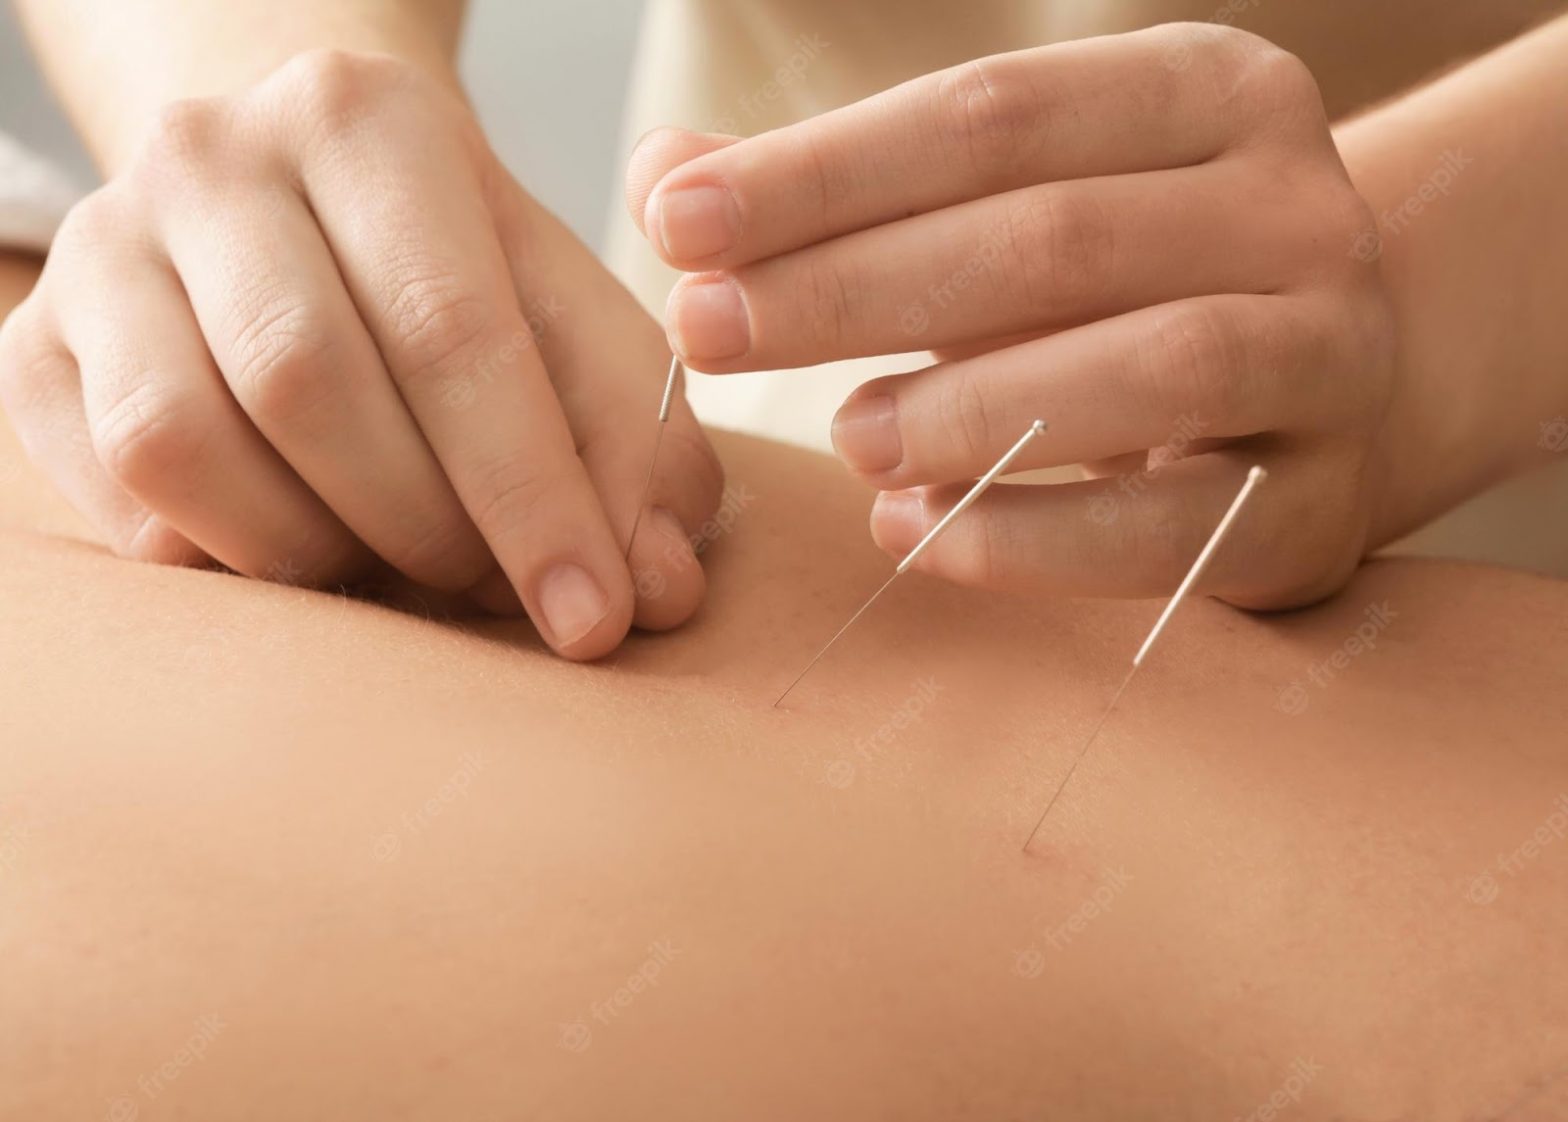 Acupuncturist treating a patient's back with a needle in hand.